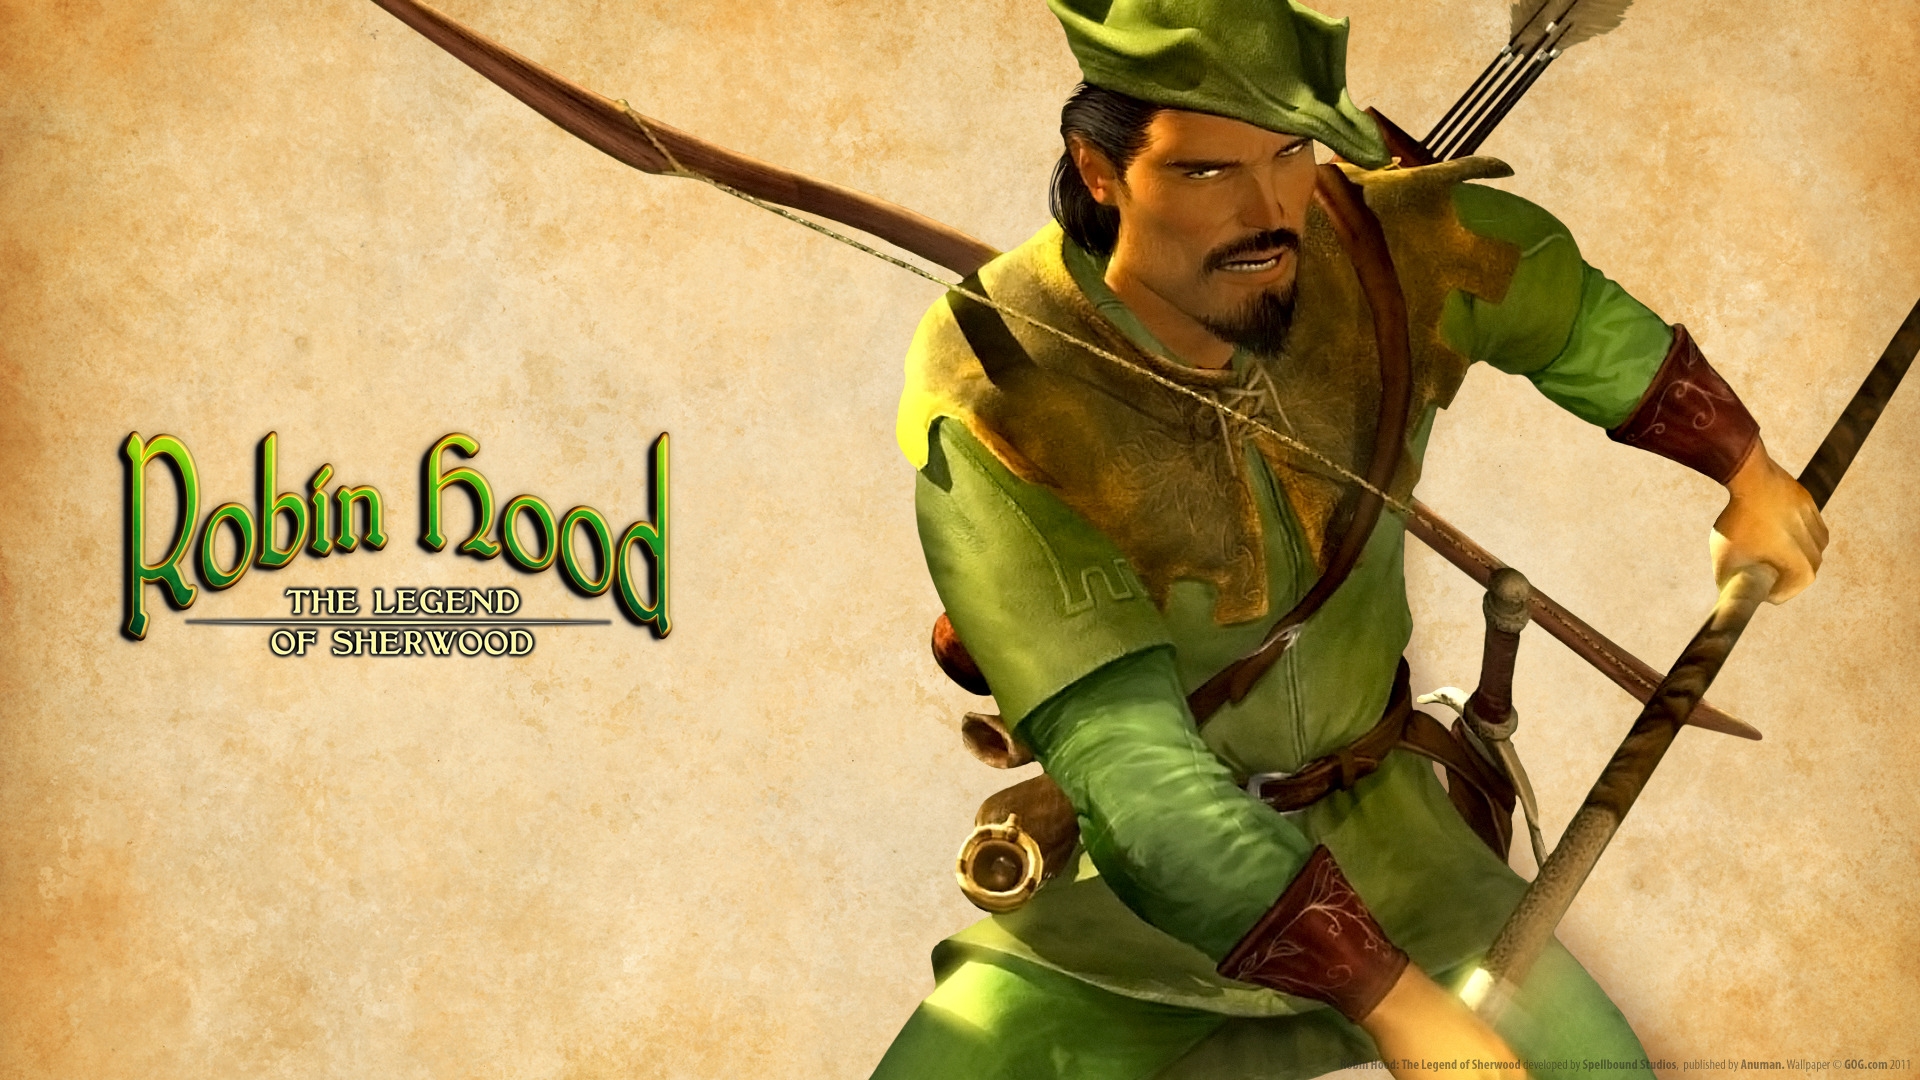 The Legend of Sherwood for 1920 x 1080 HDTV 1080p resolution